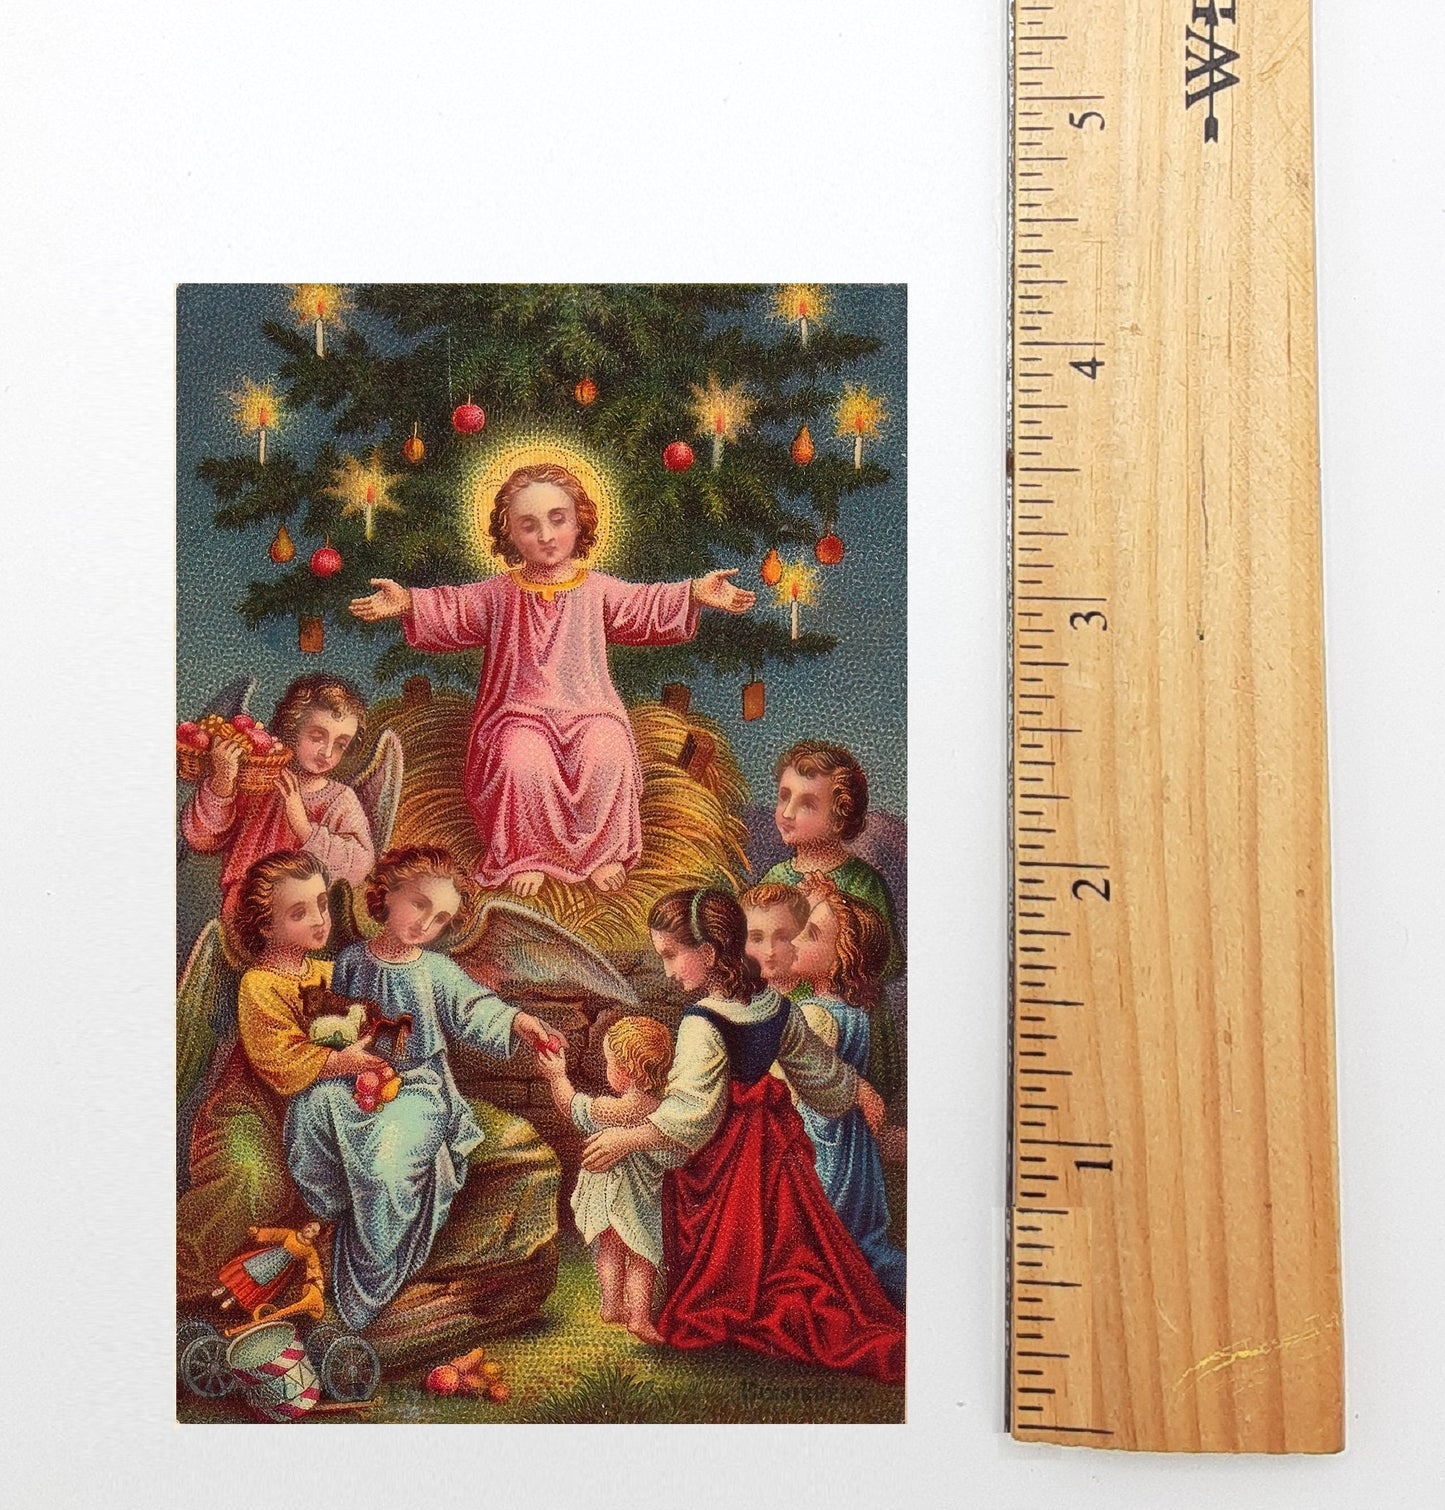 Christmas Prayer Card – pack of 10/100/1000 – Stocking Stuffer – Keeping Christ in Christmas! – Restored Vintage Holy Card